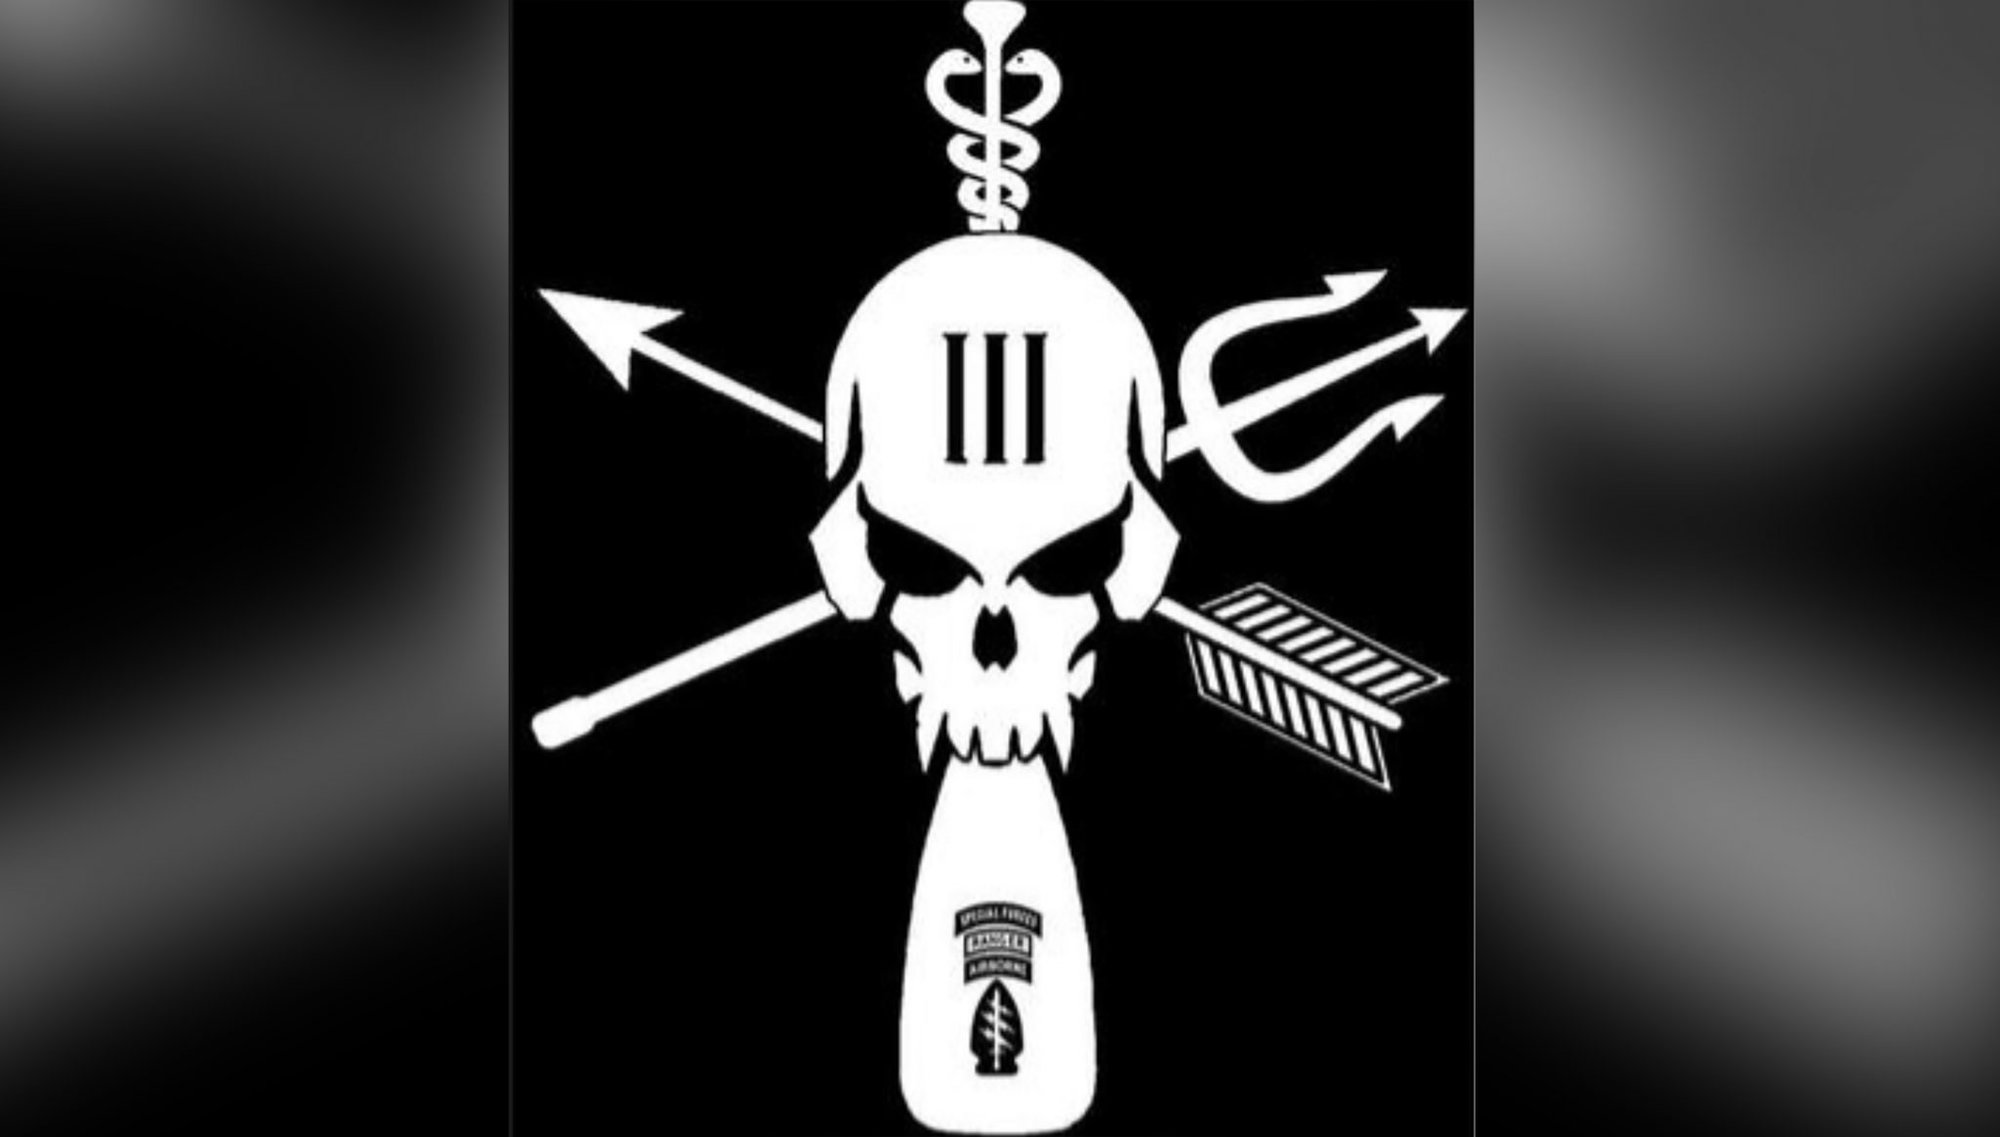 Original logo for Trauma 3, the 18 month special operations medical course at the John F. Kennedy Special Warfare Center. (U.S. Army)